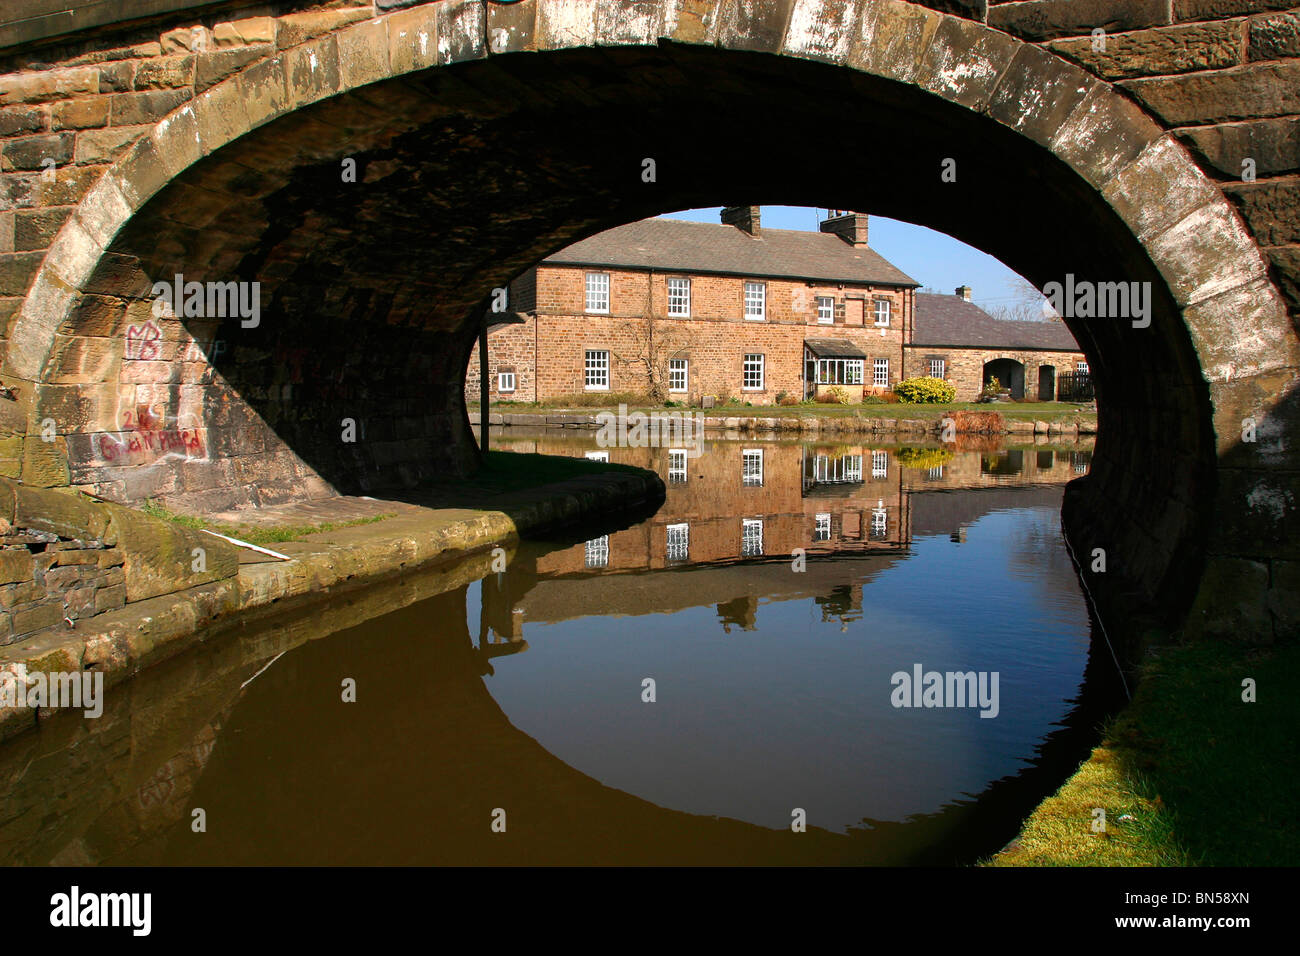 England, Cheshire, Stockport, Marple, bridge at junction of Macclesfield and Peak Forest Canals Stock Photo